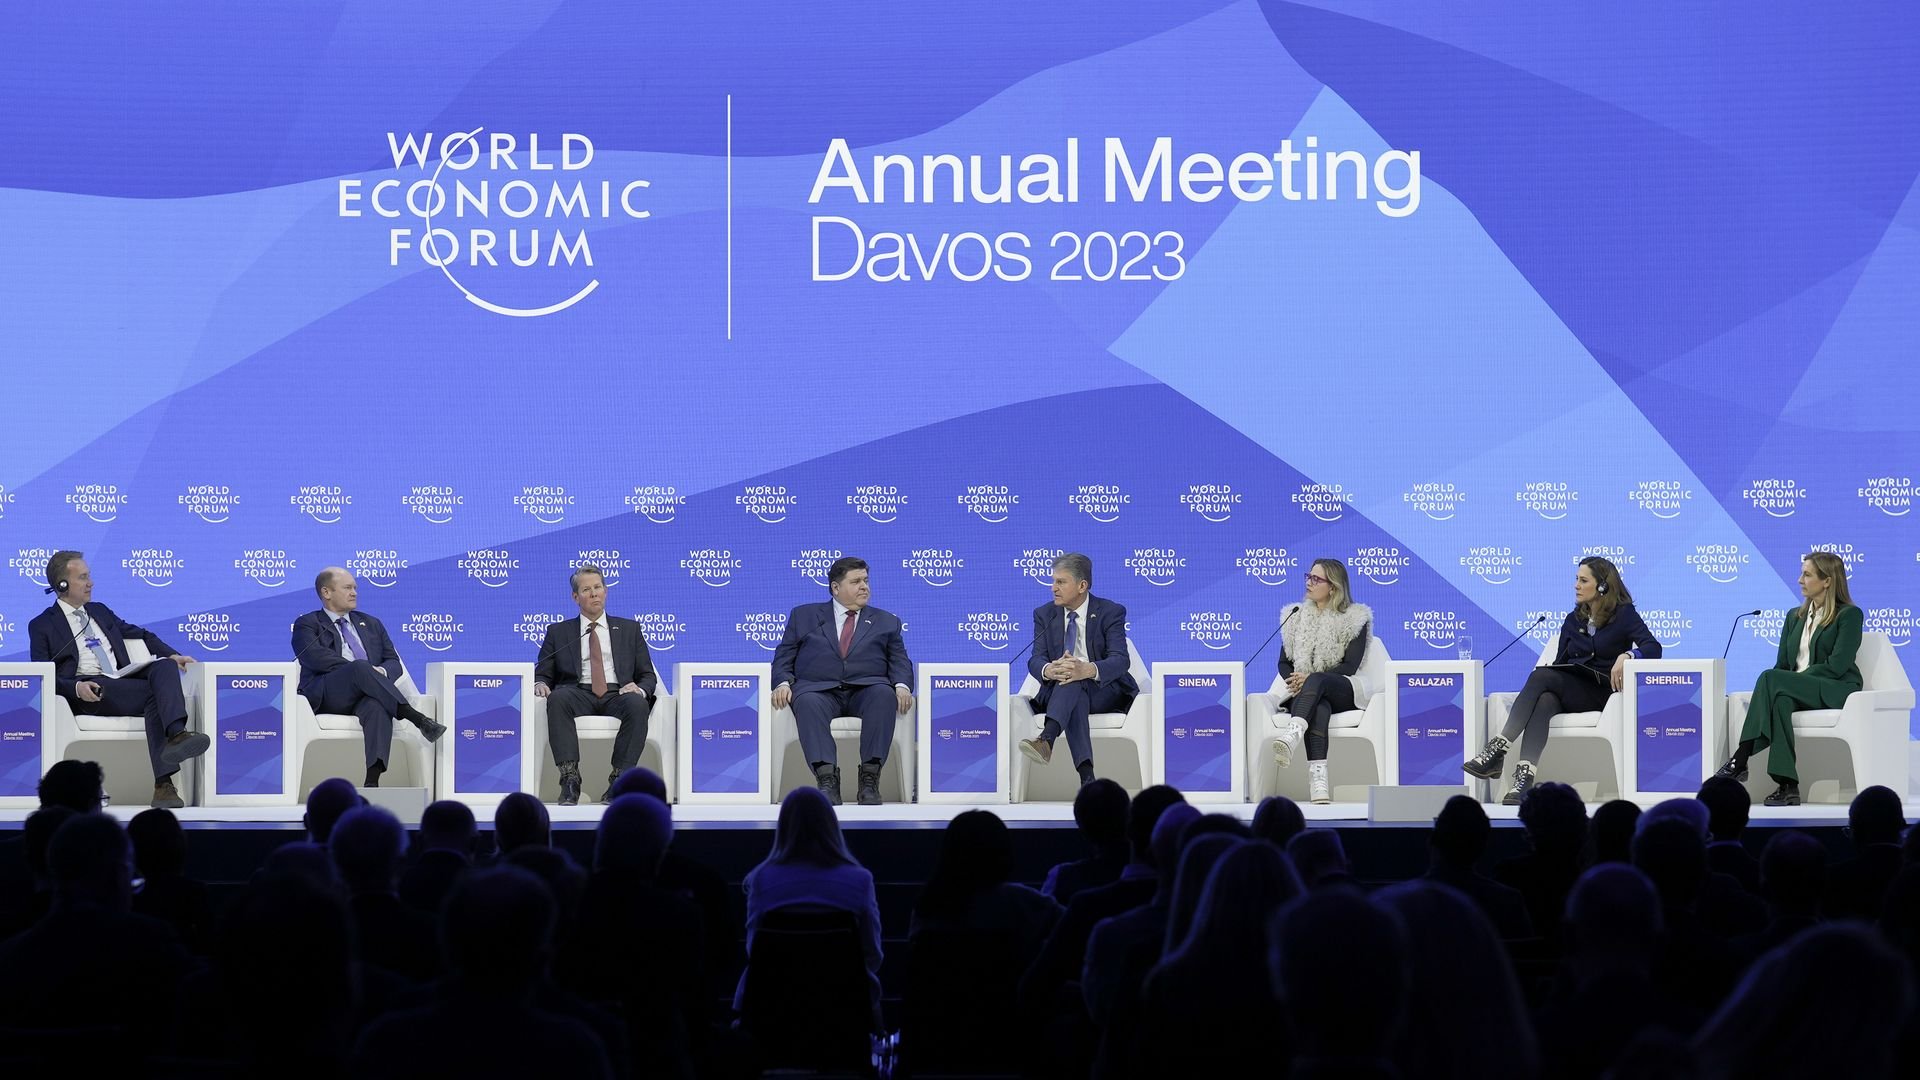 Here's what you should know about the World Economic Forum in Davos - cover